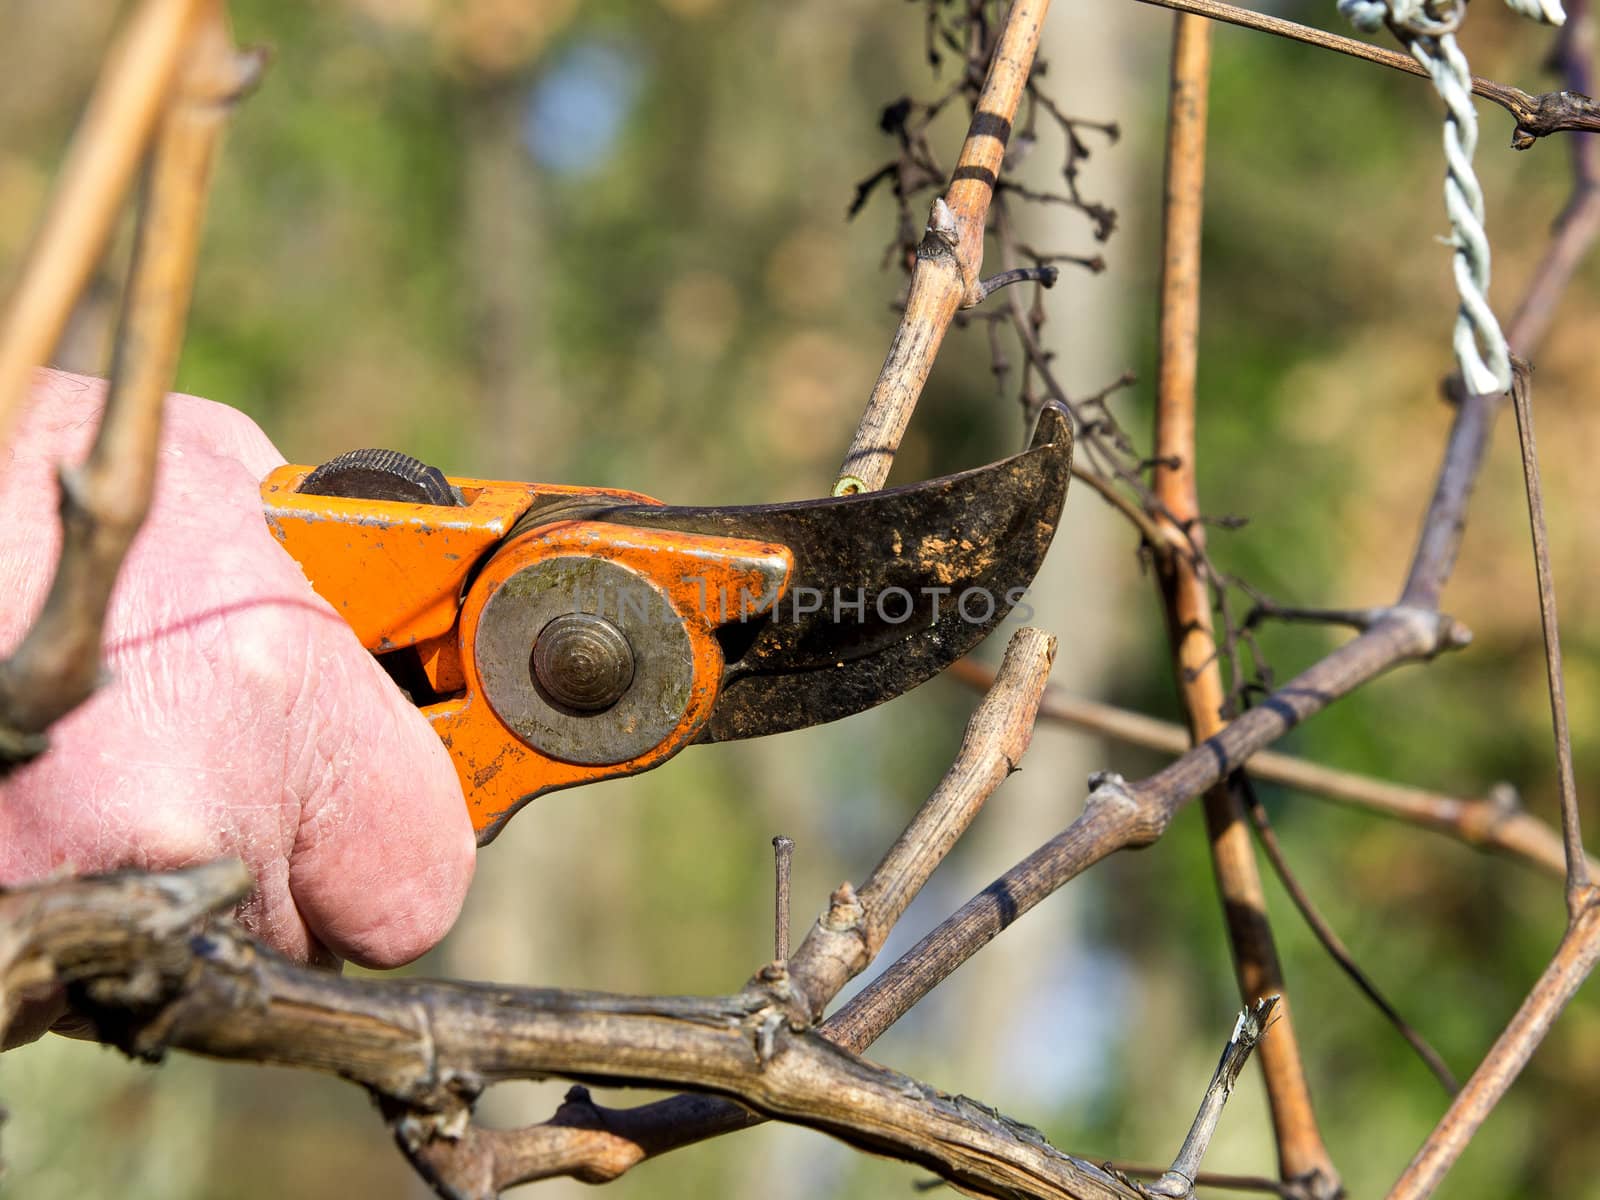 Ocutting old branches in the vineyard